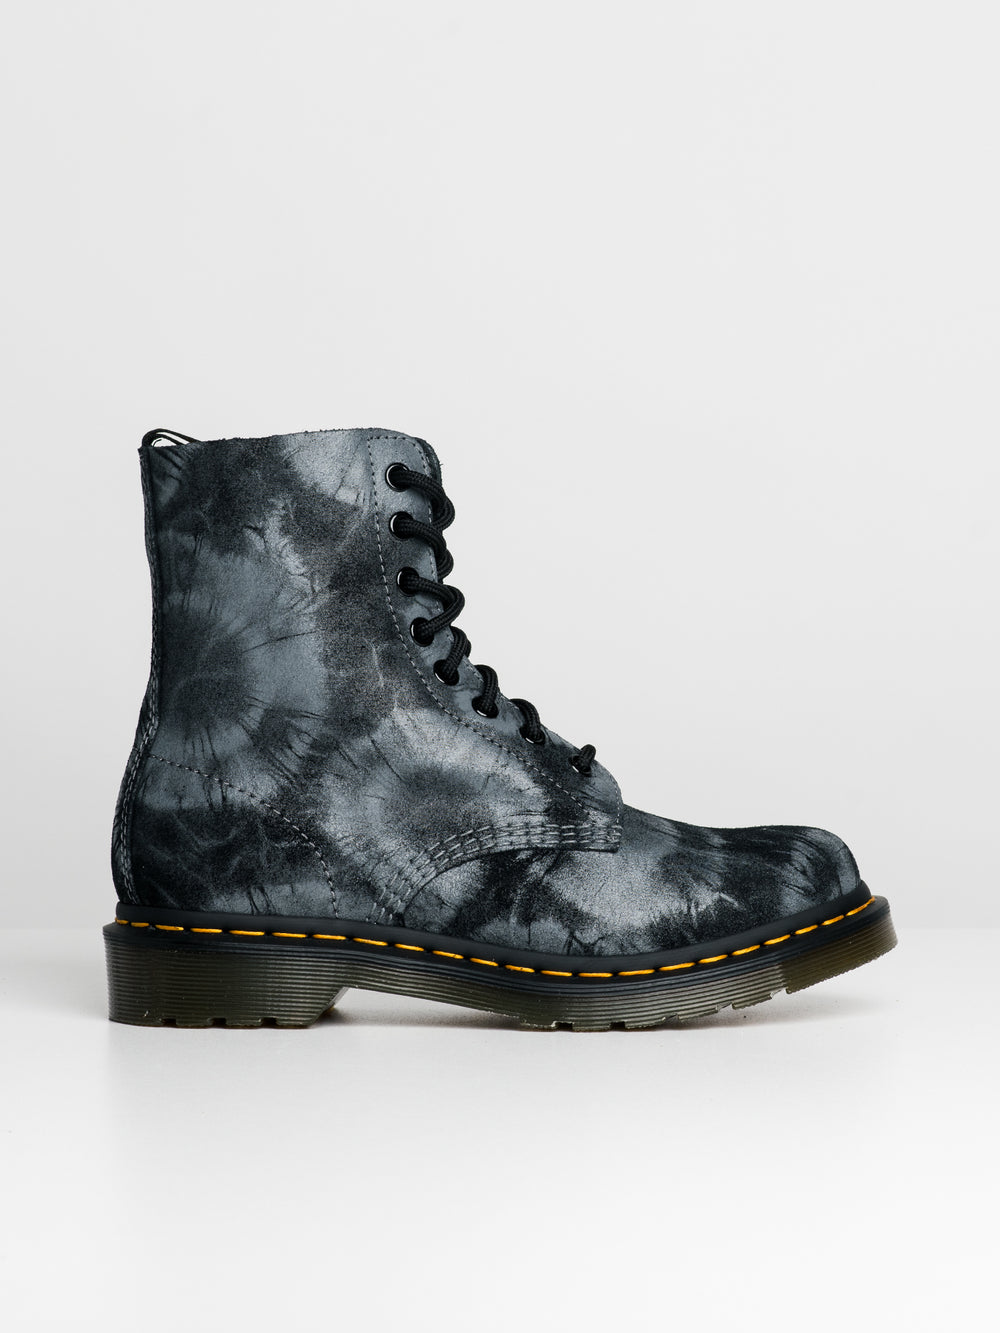 WOMENS DR MARTENS 1460 PASCAL TIE DYE BOOT - CLEARANCE